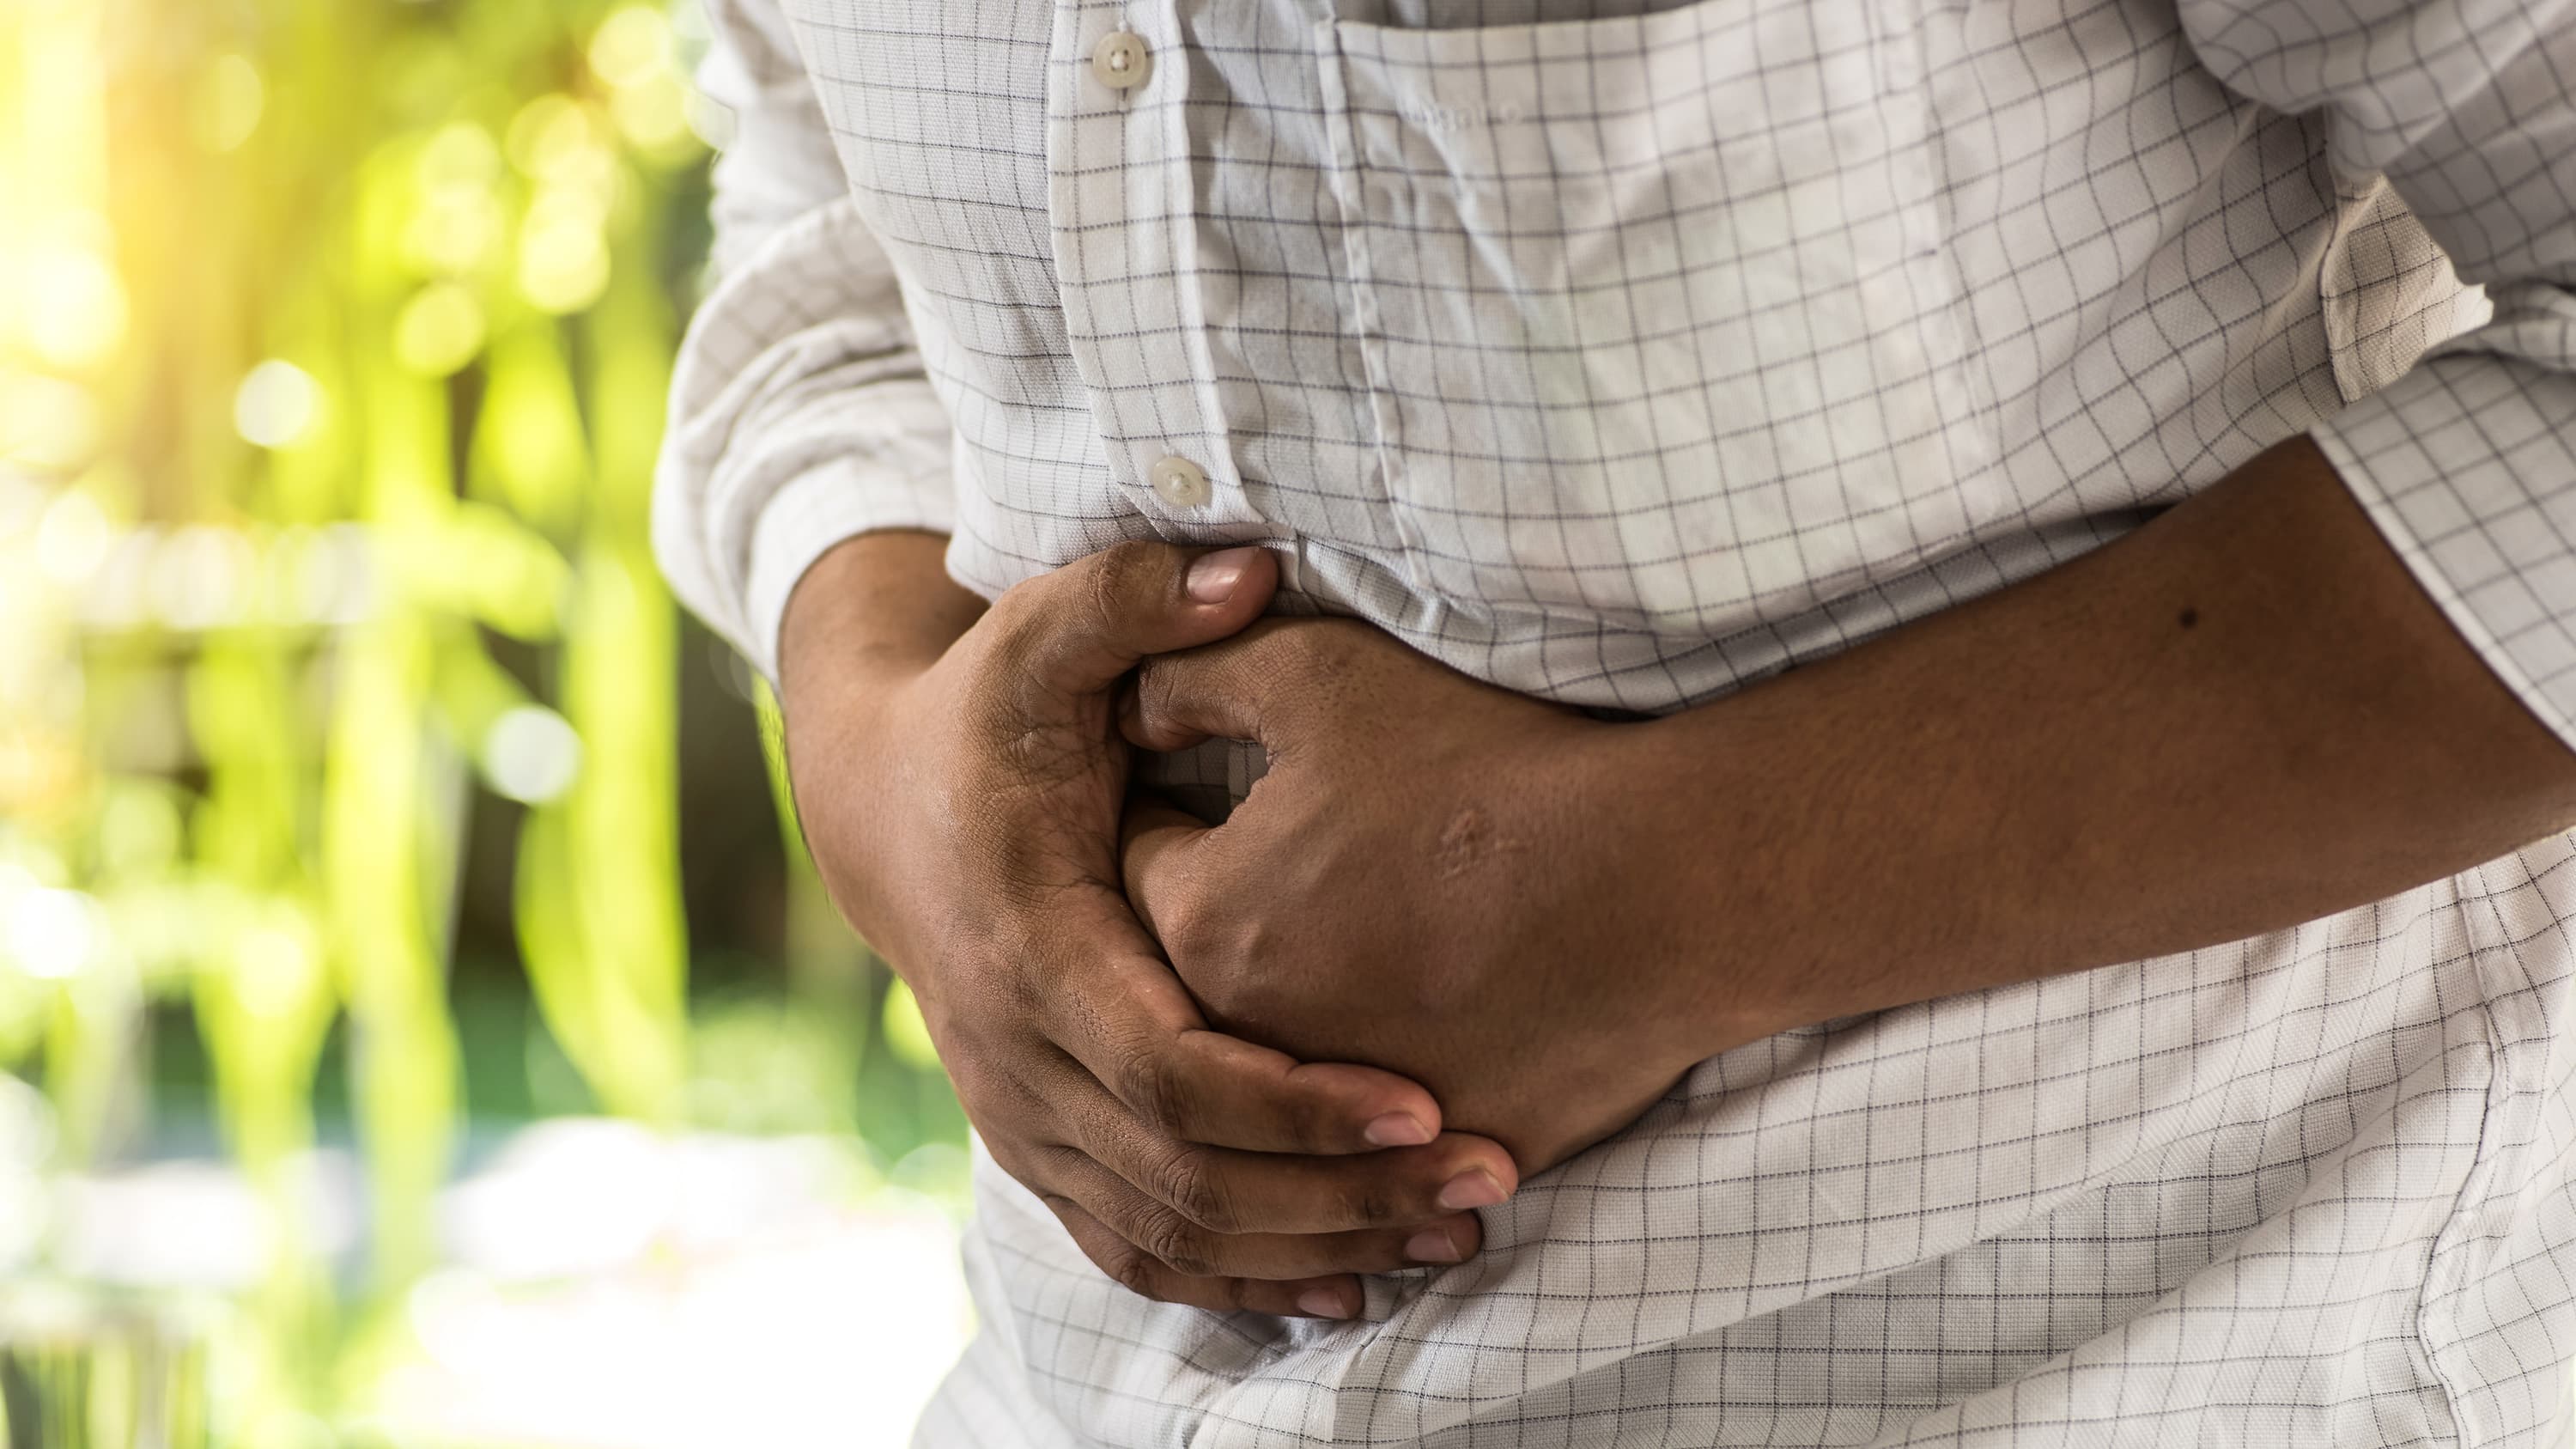 A man, in pain, touches his stomach. He may be experiencing abdominal migraine.